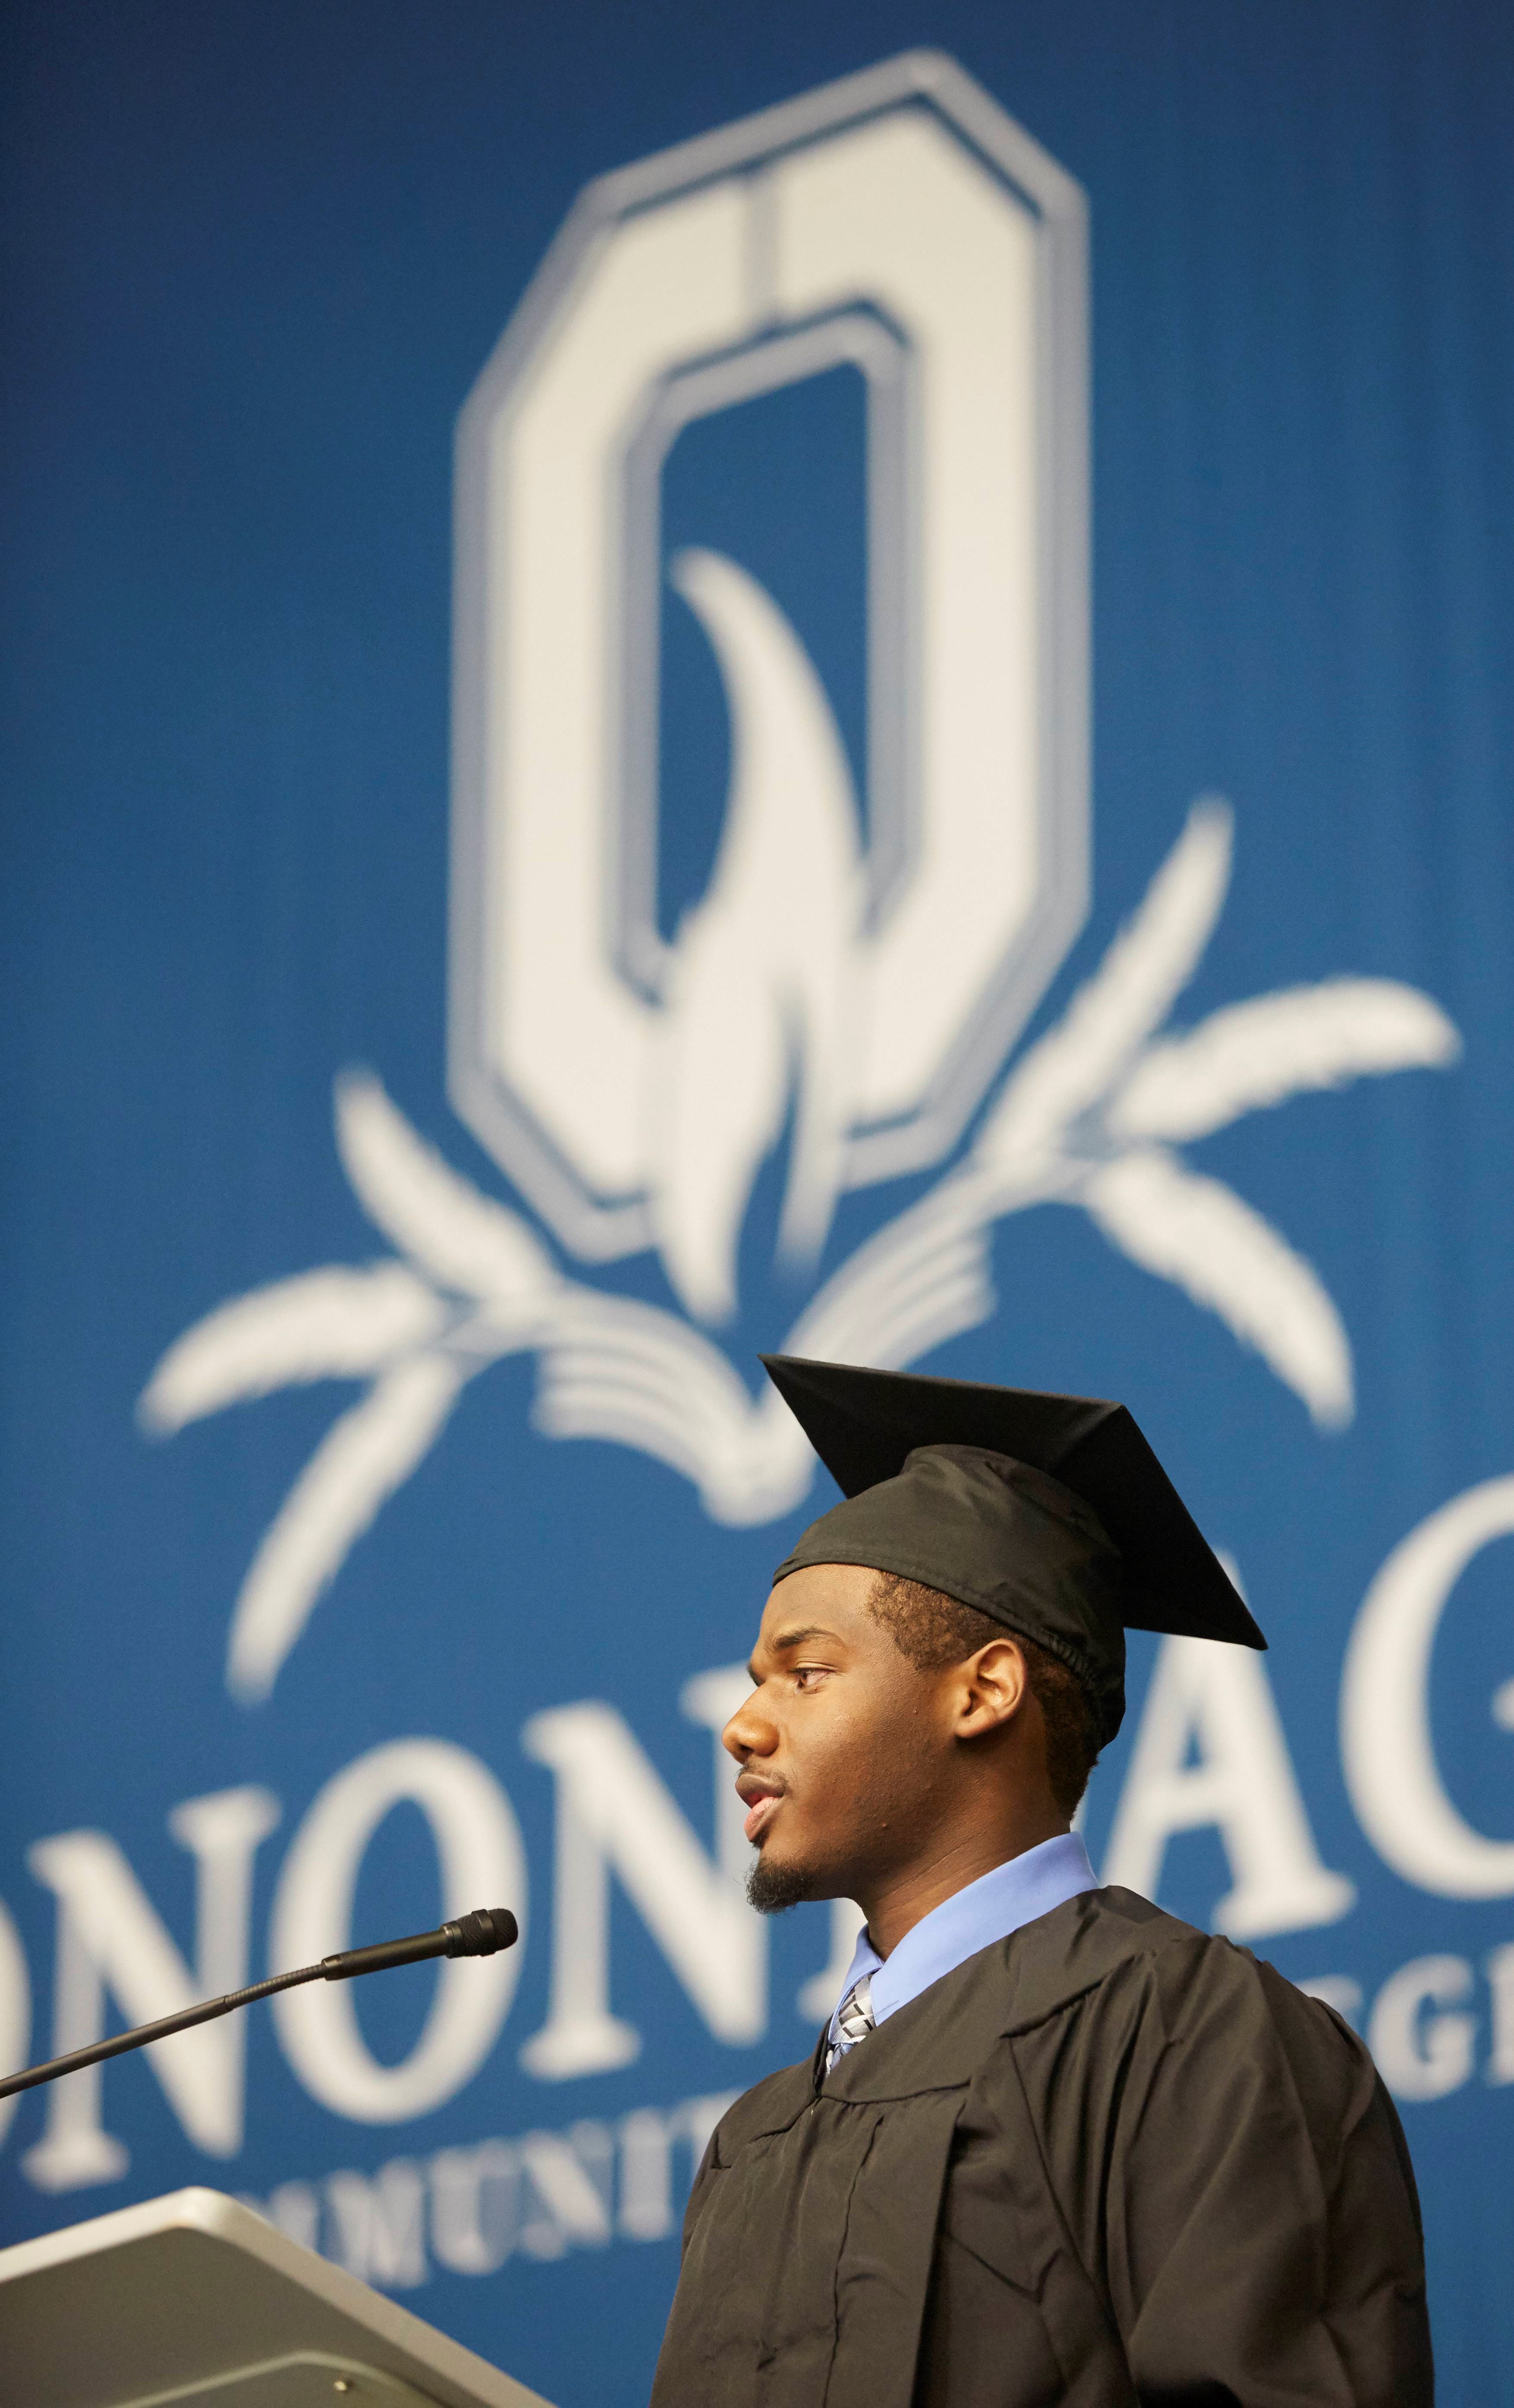 Garner Jr. was the Student Speaker at OCC's Commencement in 2015.daga Community College's Ferrante Hall while he was a student here. Today he is in Lockhheed Martin's Engineering Leadership Development Program.